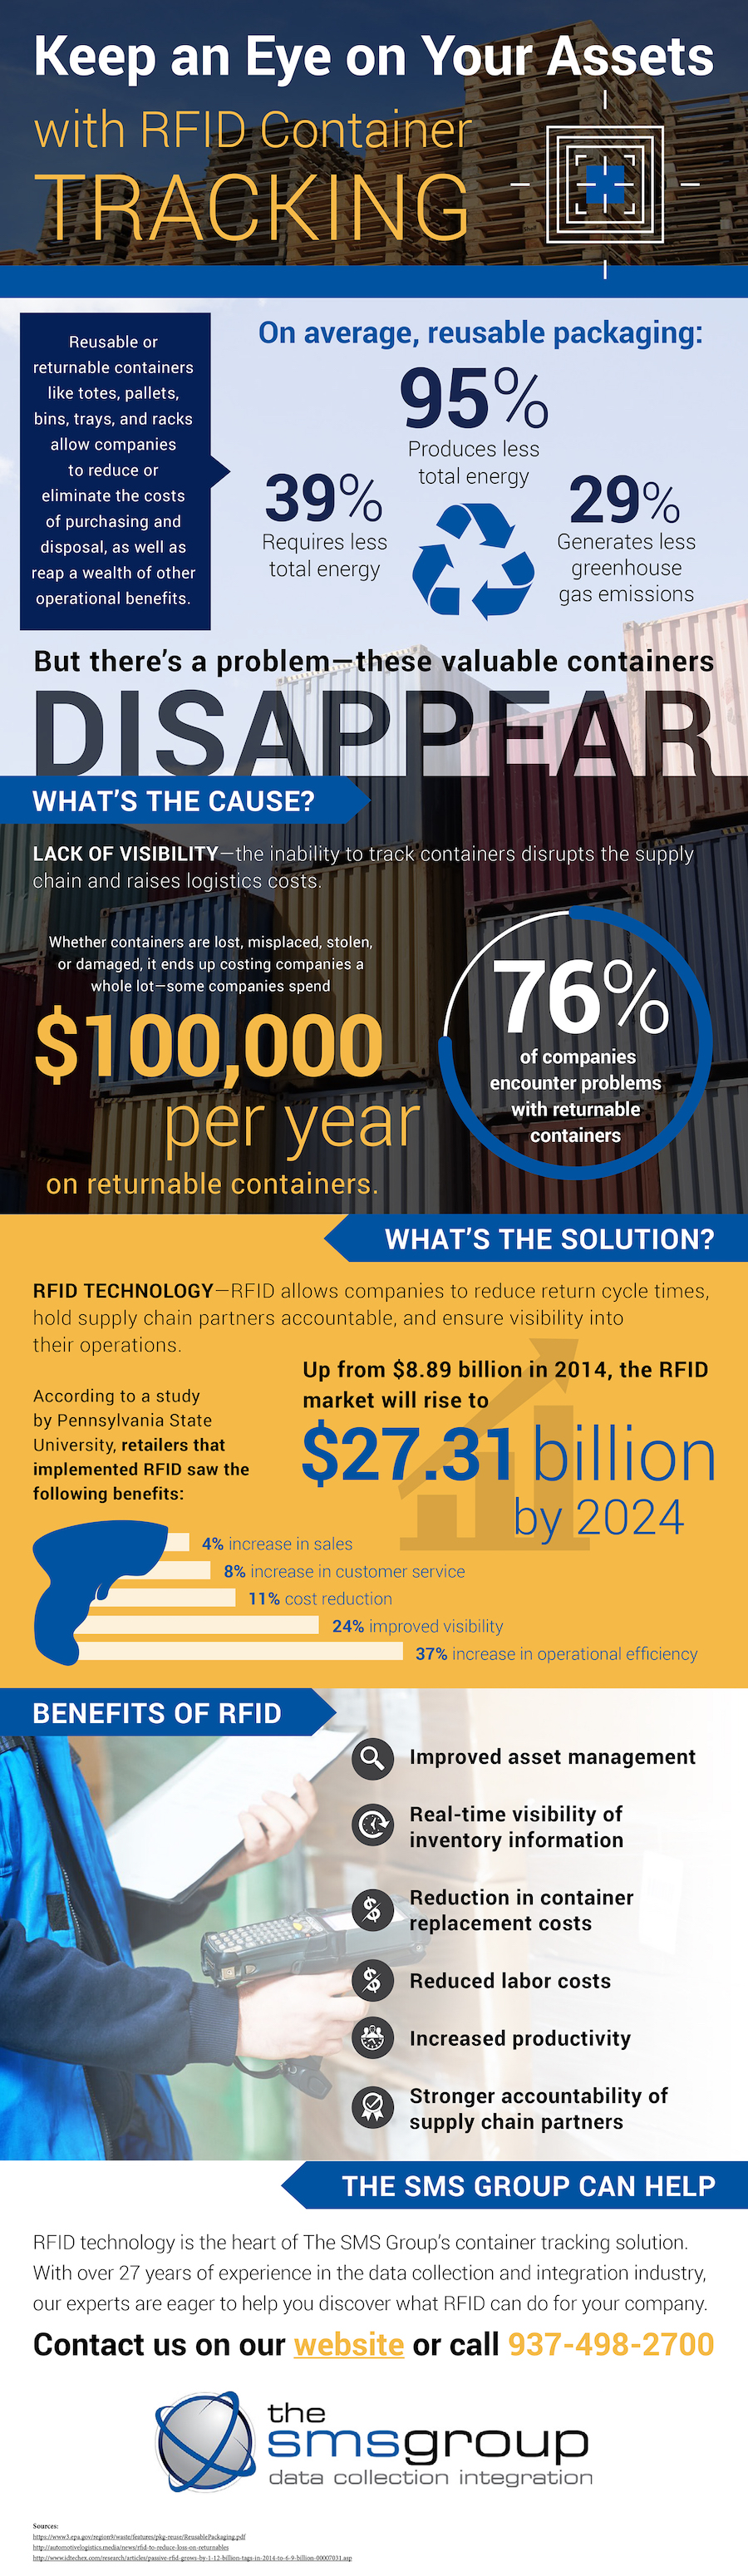 16_06_SMS_RFID_Tracking_Infographic